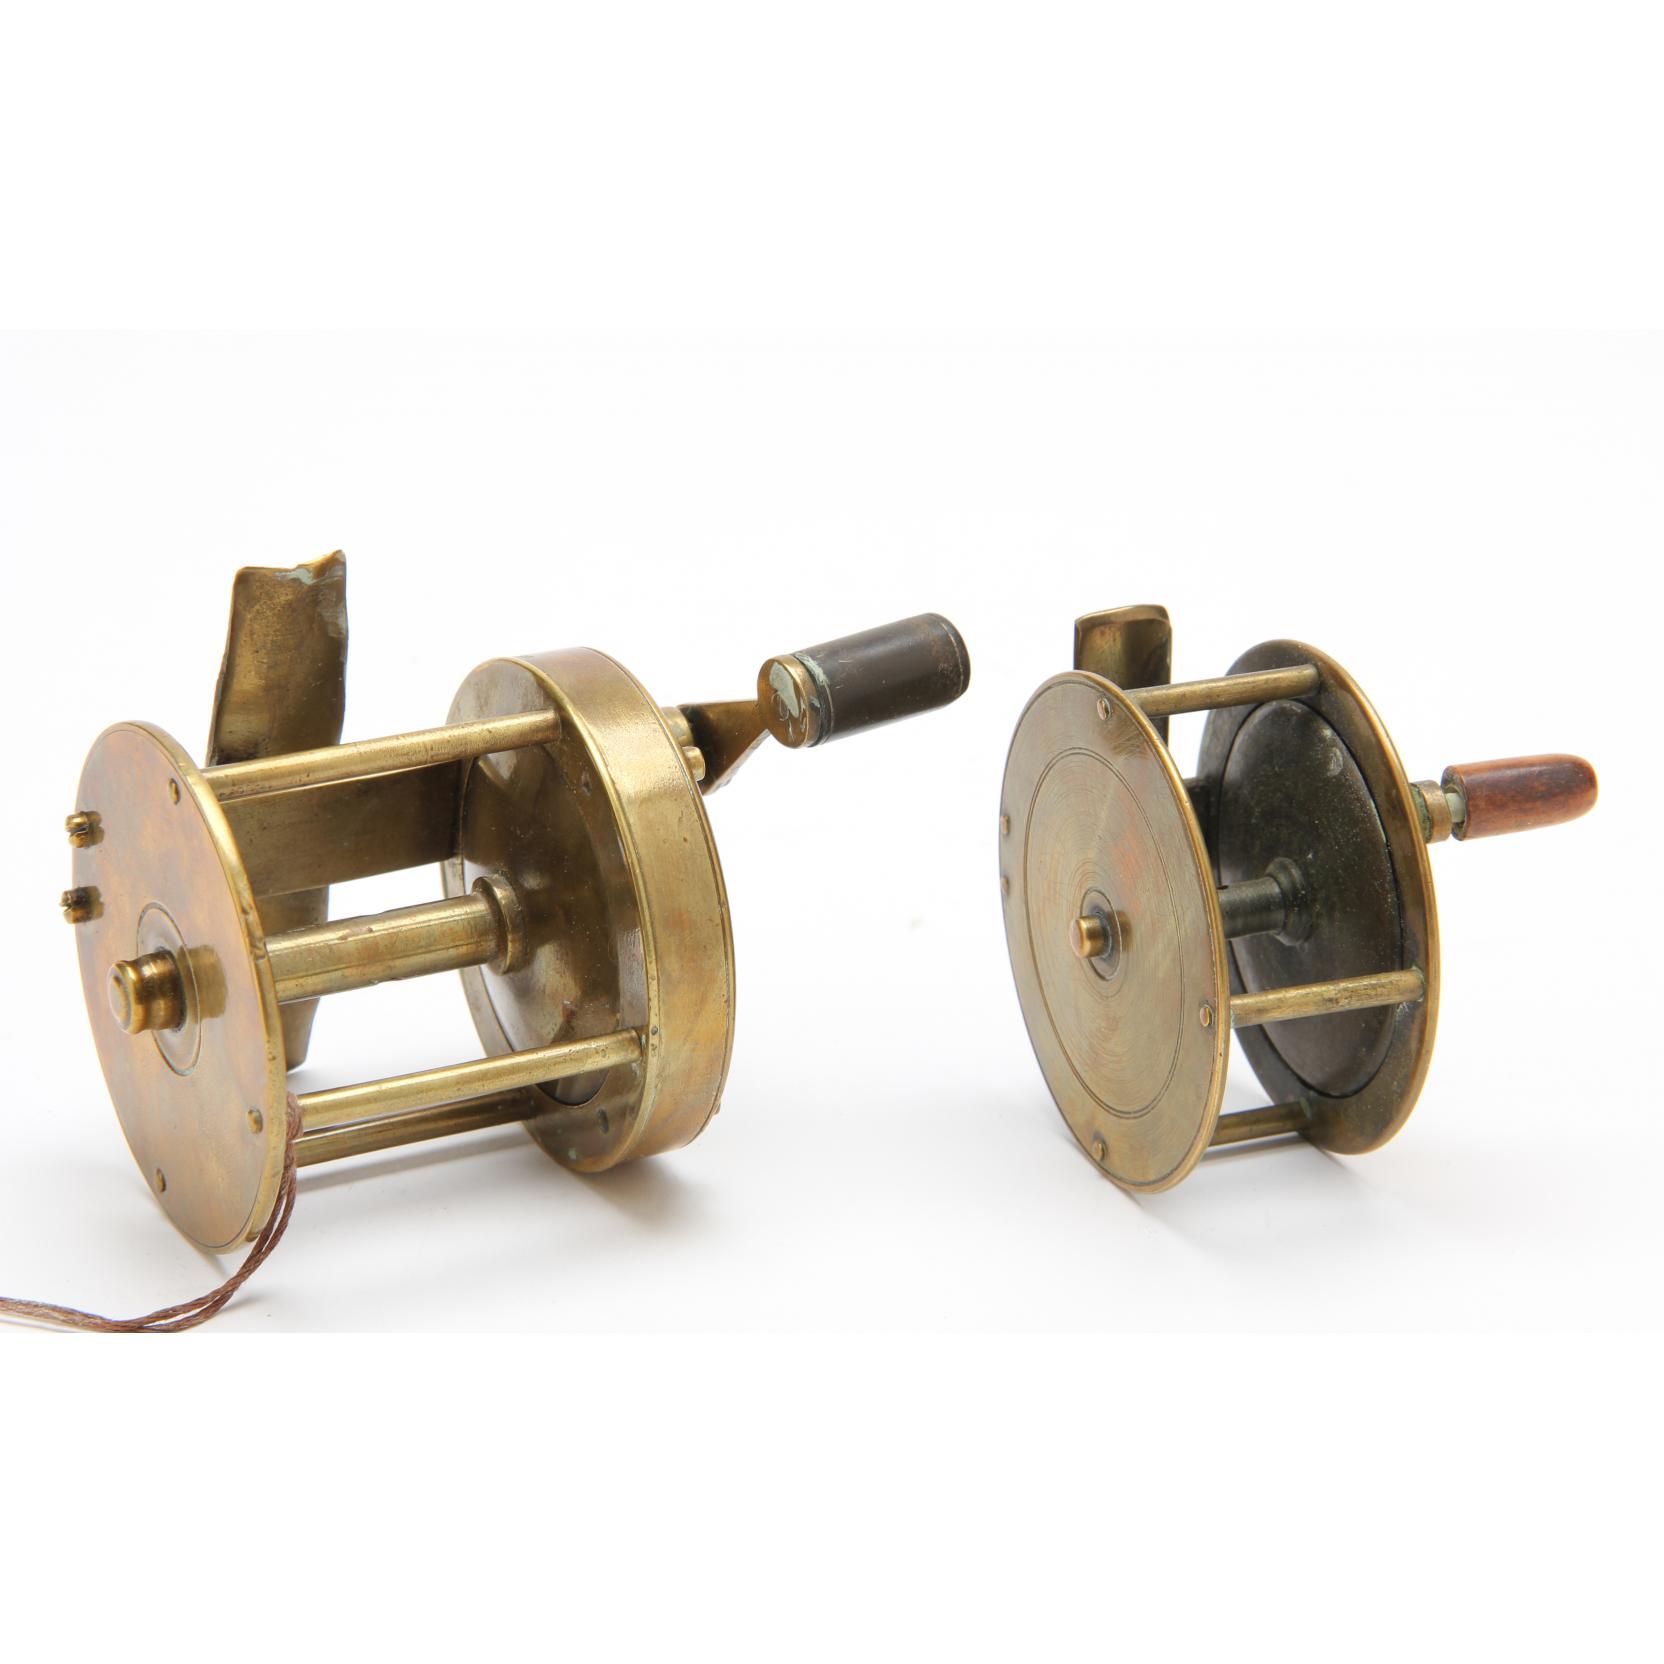 Two Antique Brass Spinning Reels (Lot 27 - Single-Owner Antique Sporting  CollectionSep 30, 2015, 6:00pm)